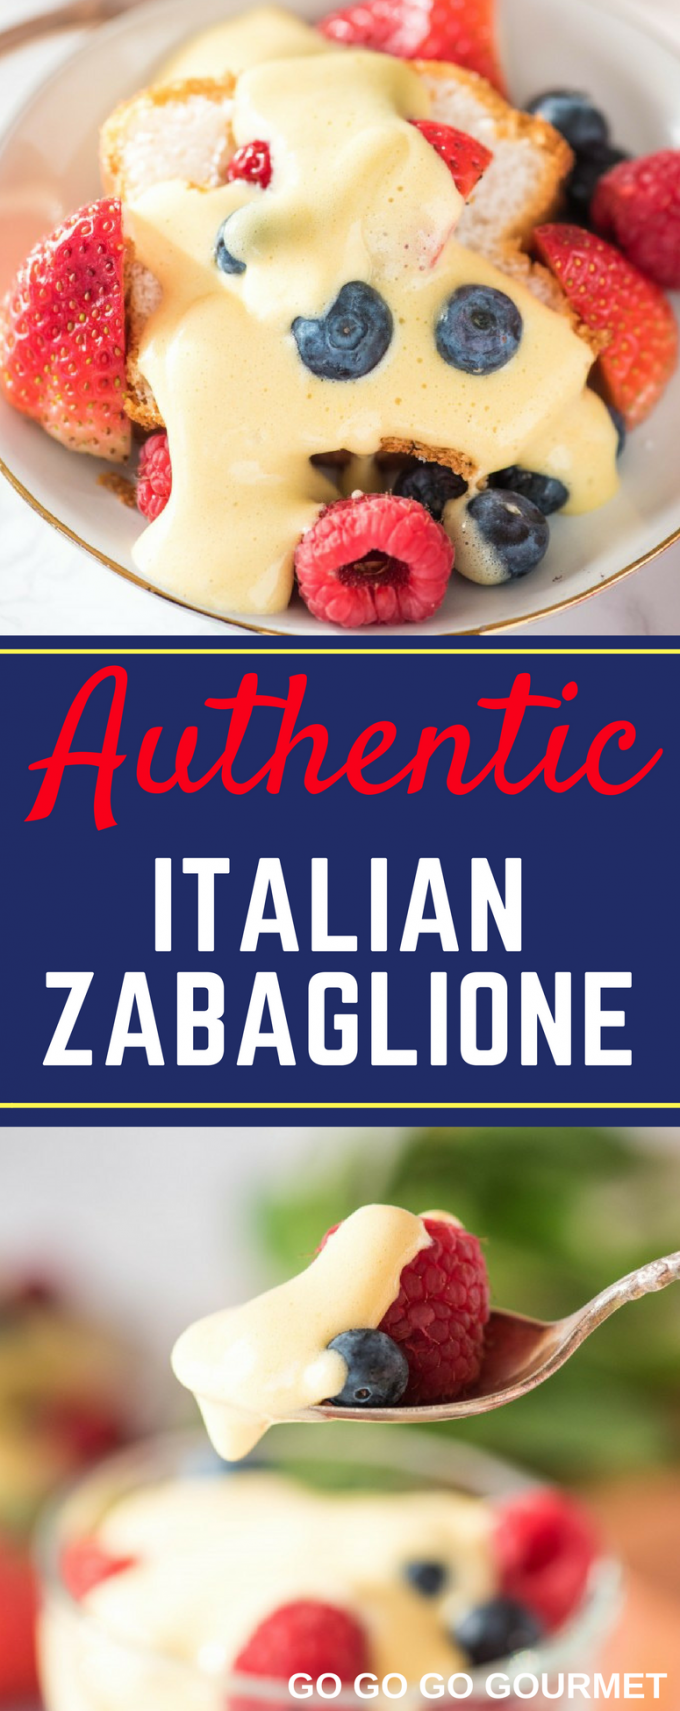 You are going to love this easy Authentic Italian Zabaglione recipe! Cool and creamy custard with berries and cake in a mini trifle. You can make this without wine, but I prefer to use marsala! #italianzabaglione #authenticitaliandesserts #easyzabaglionerecipe #gogogogourmet via @gogogogourmet